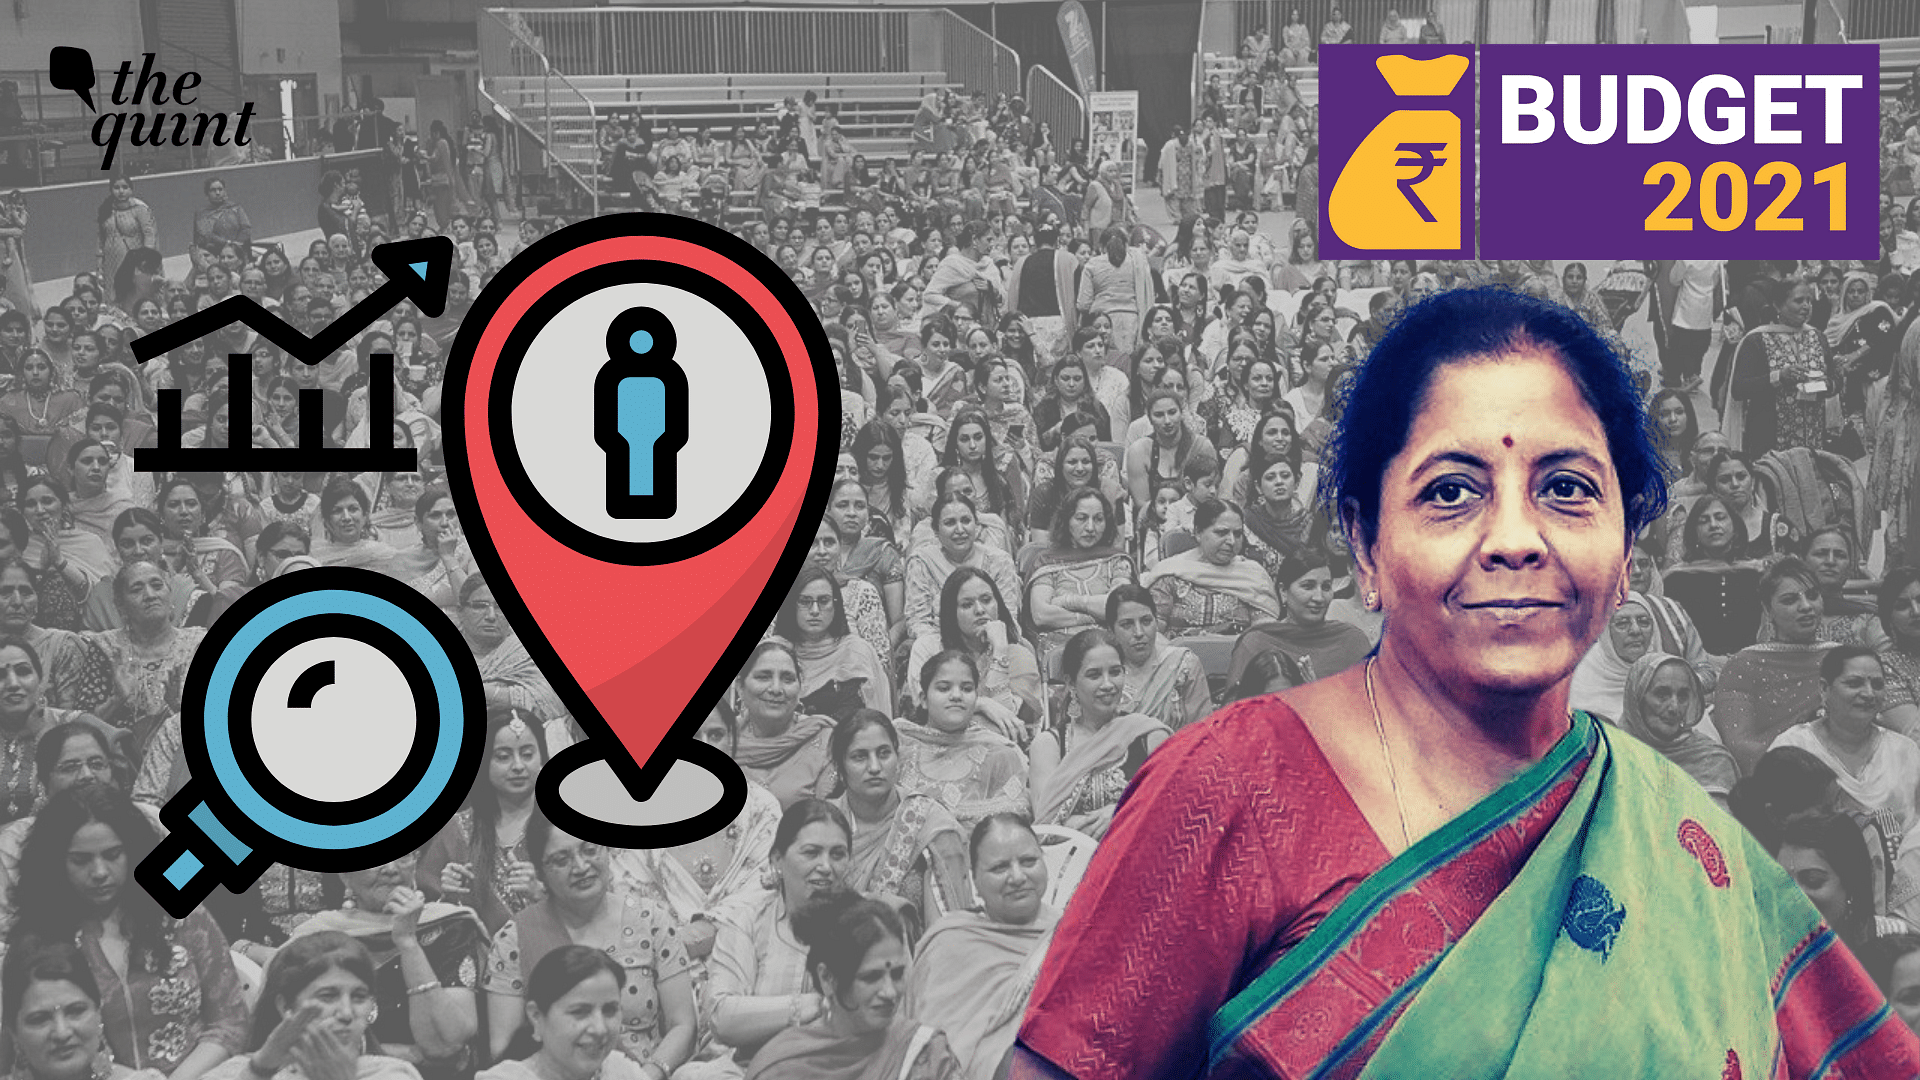 Union Finance Minister Nirmala Sitaraman announced in her Budget speech on Monday, 1 February, that the forthcoming census would be the first digital census in the history of India.